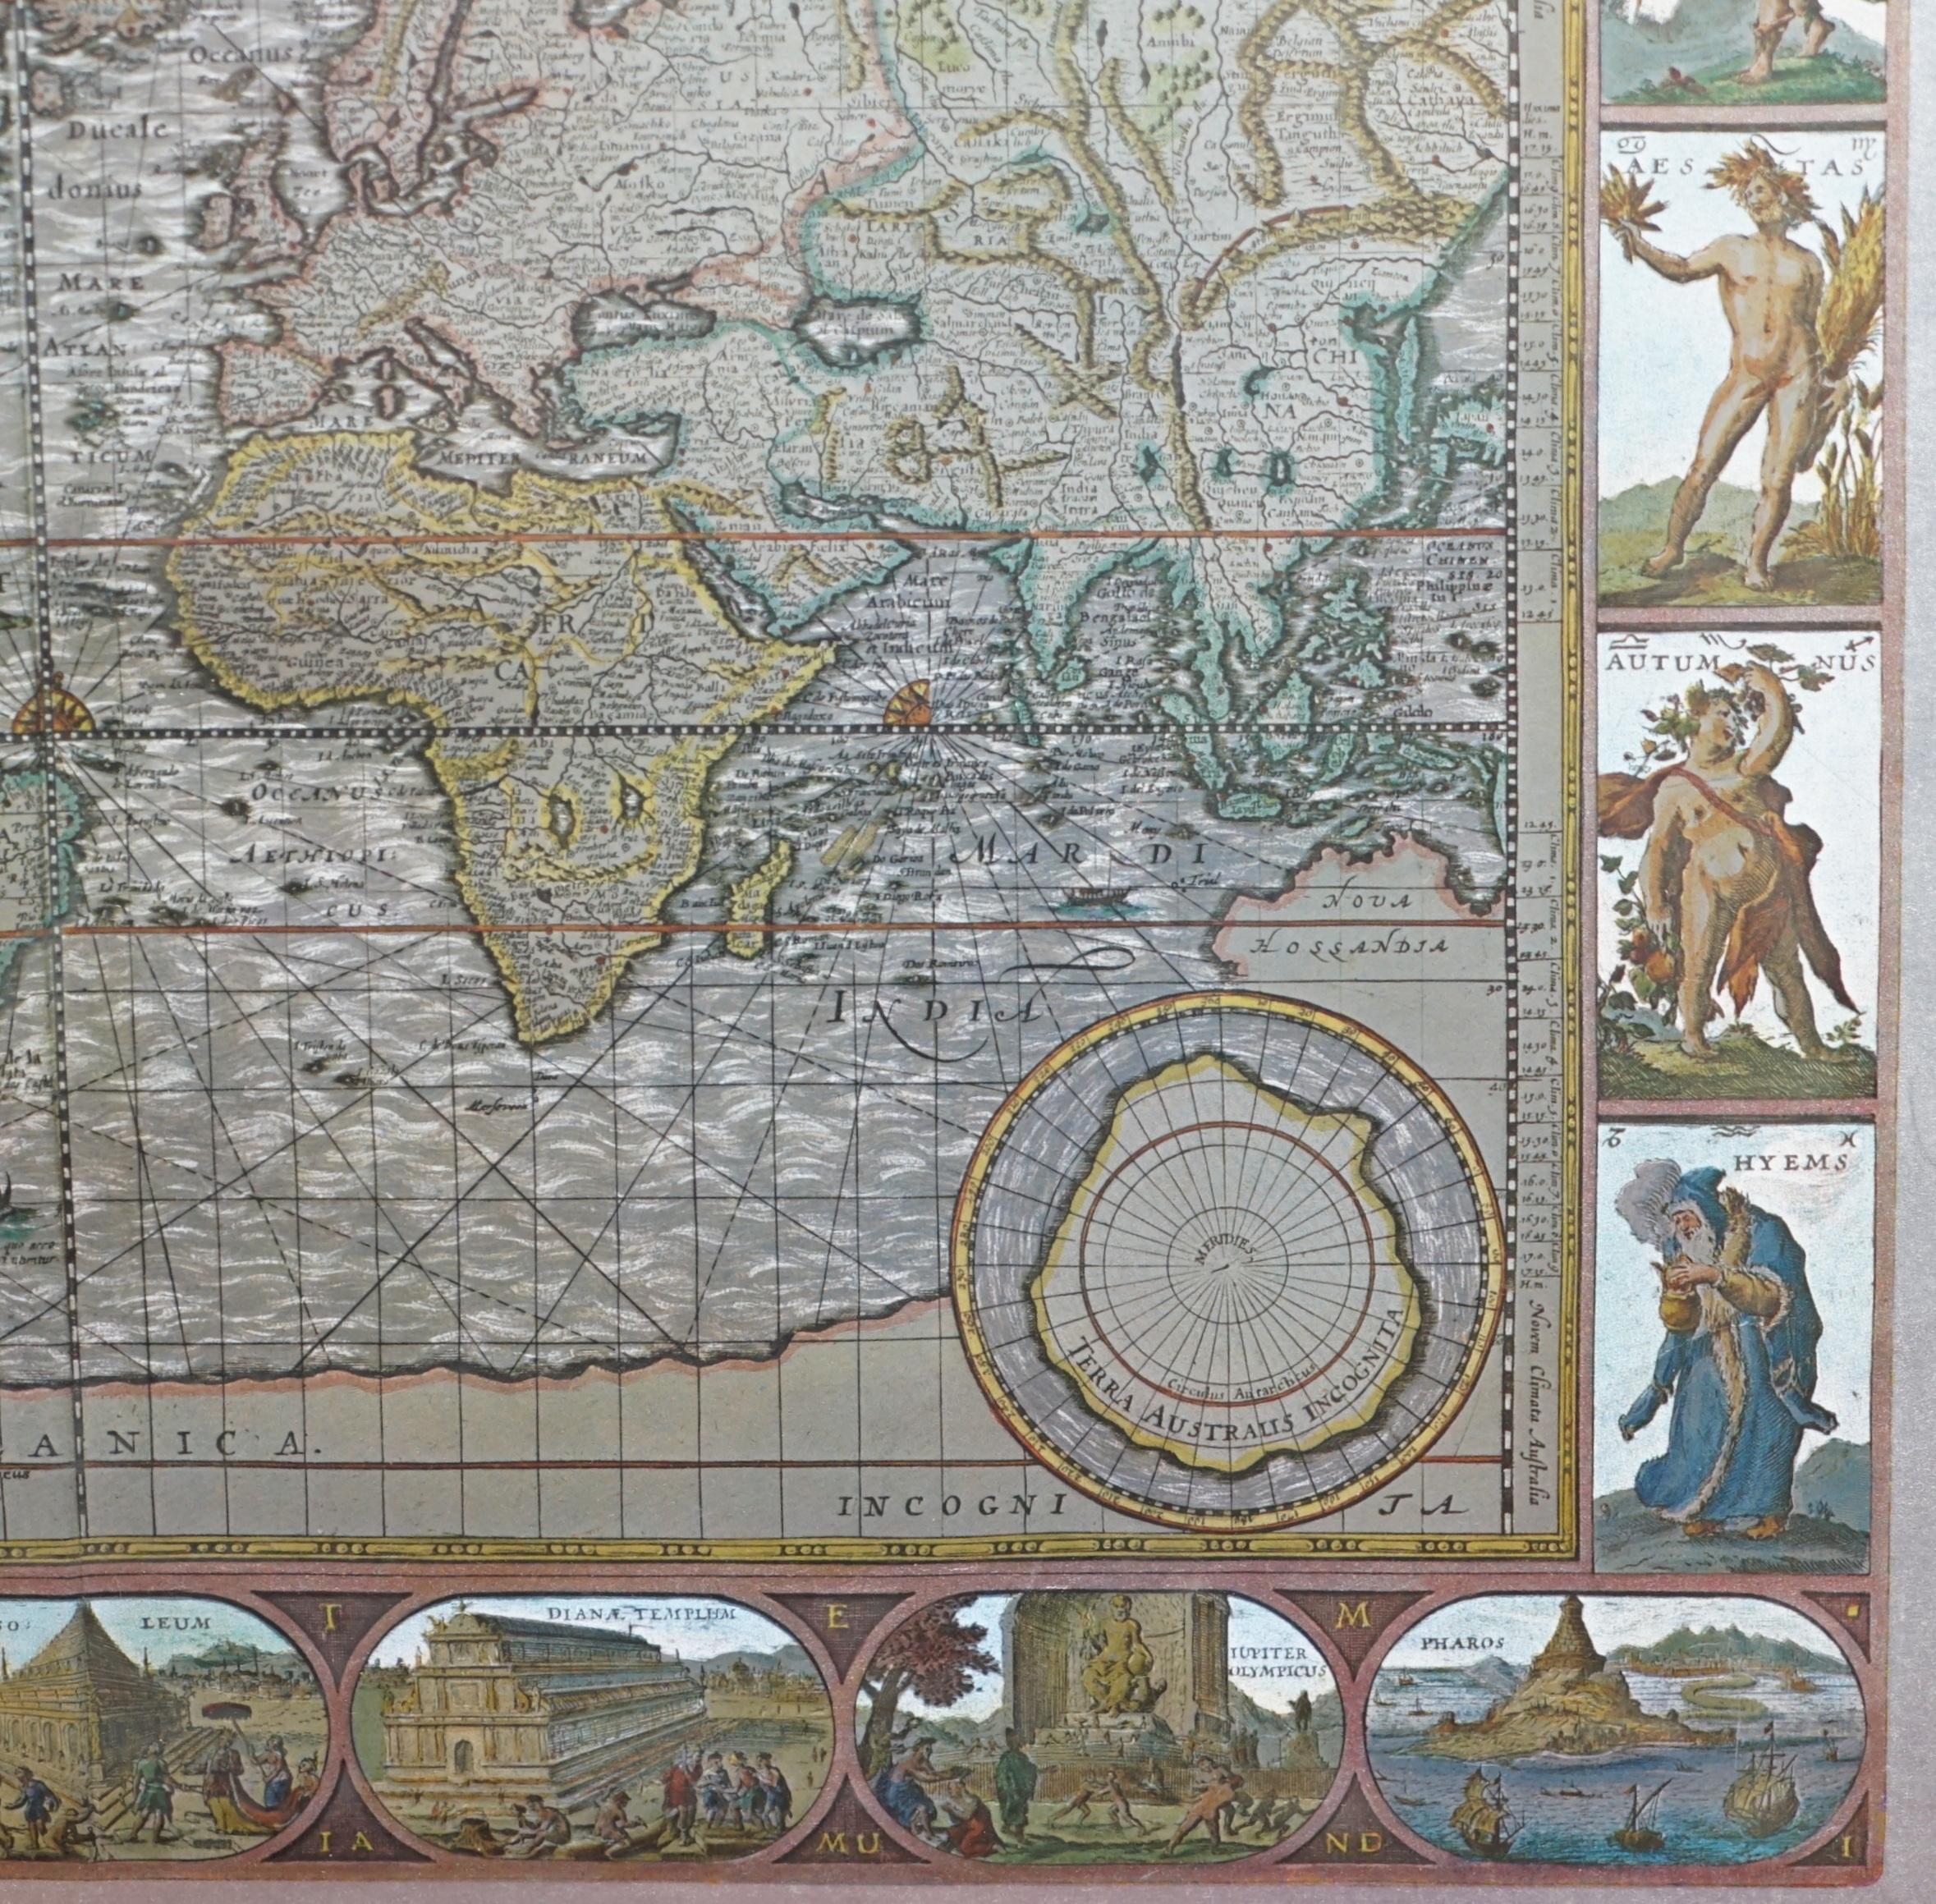 Modern Silver Leaf Foil Wall World Map Engraving Based on the Original Moses Pitt, 1681 For Sale